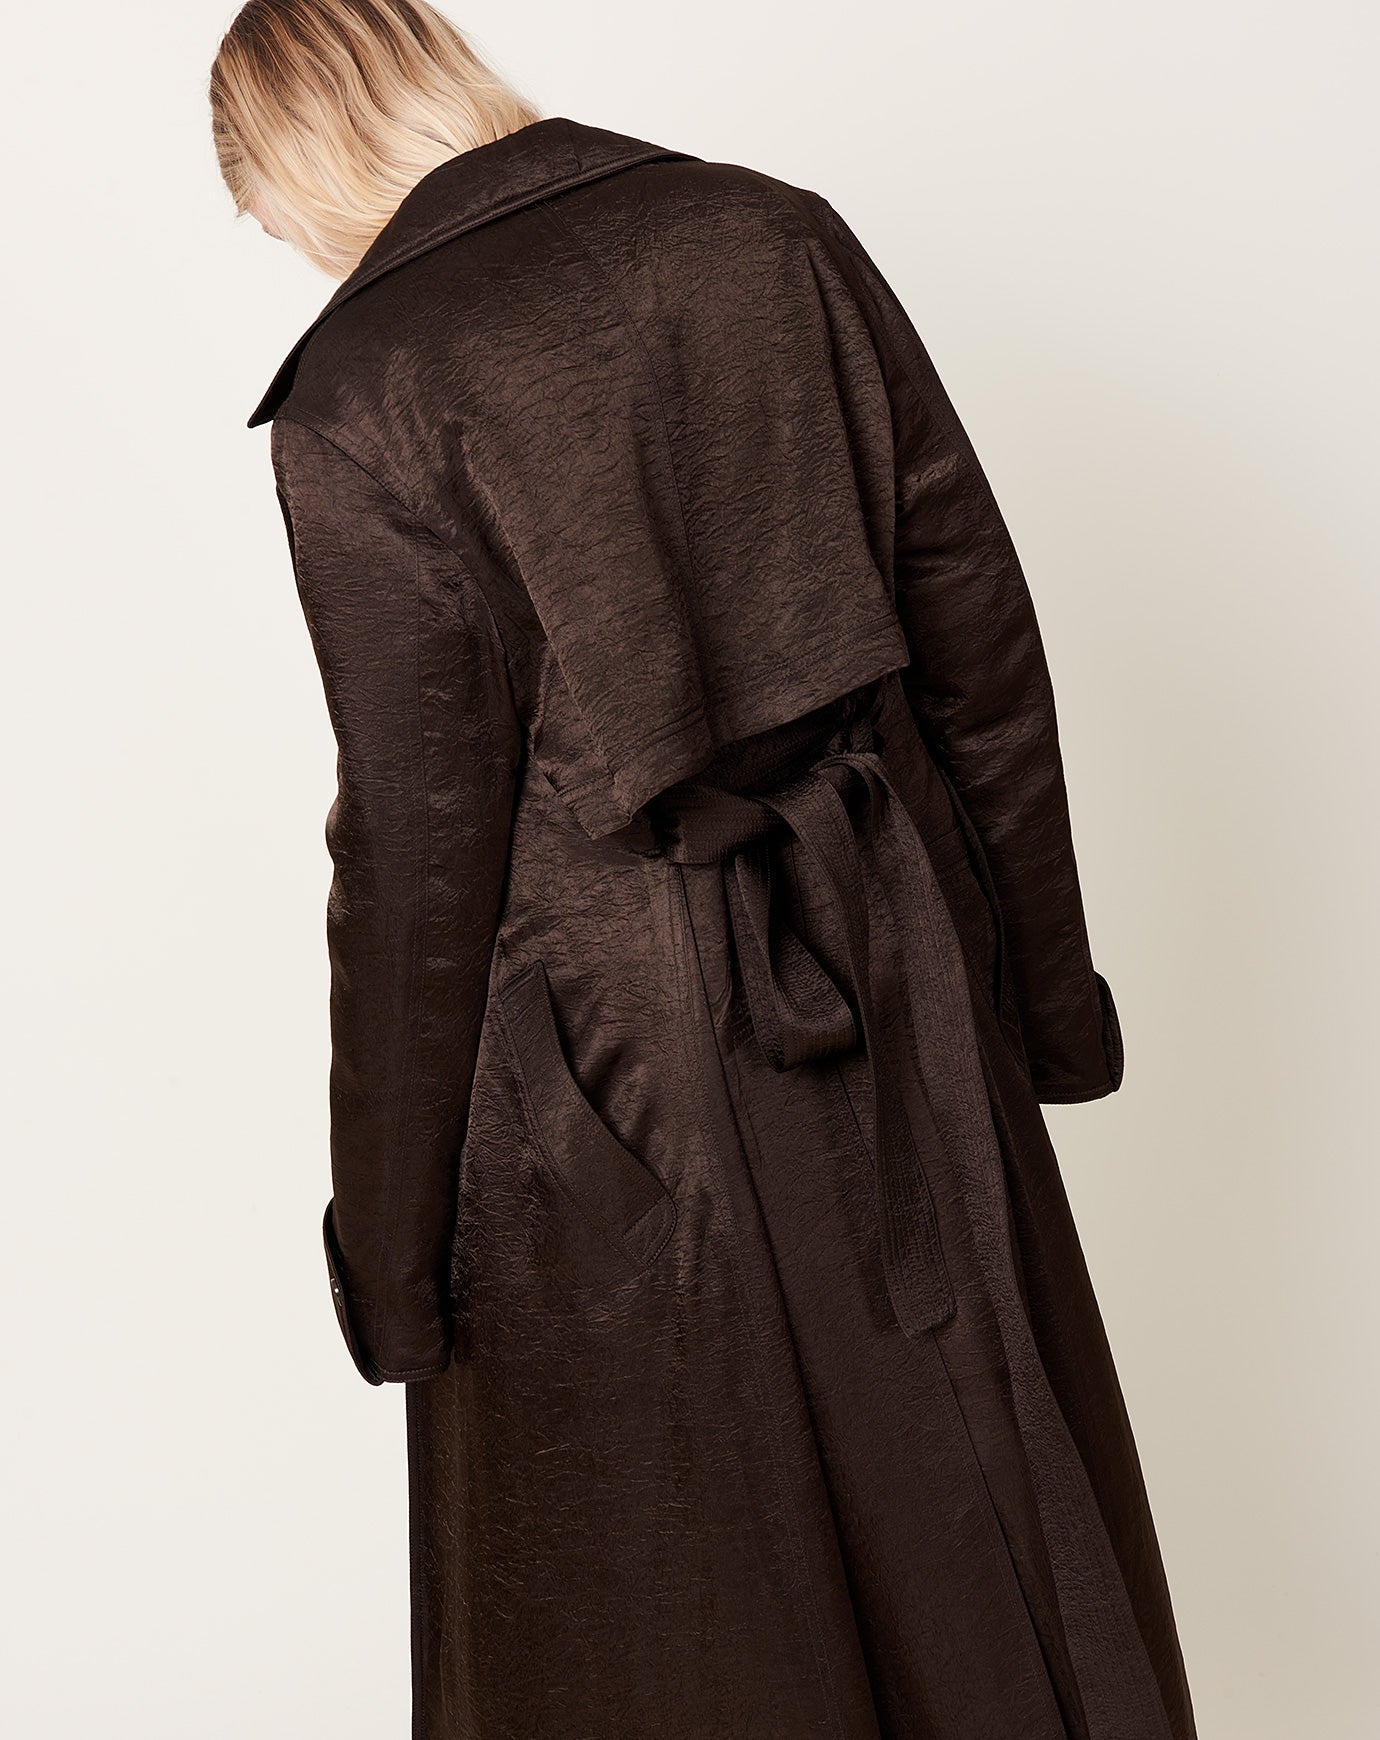 Maria McManus Quilted Trench Coat in Chocolate